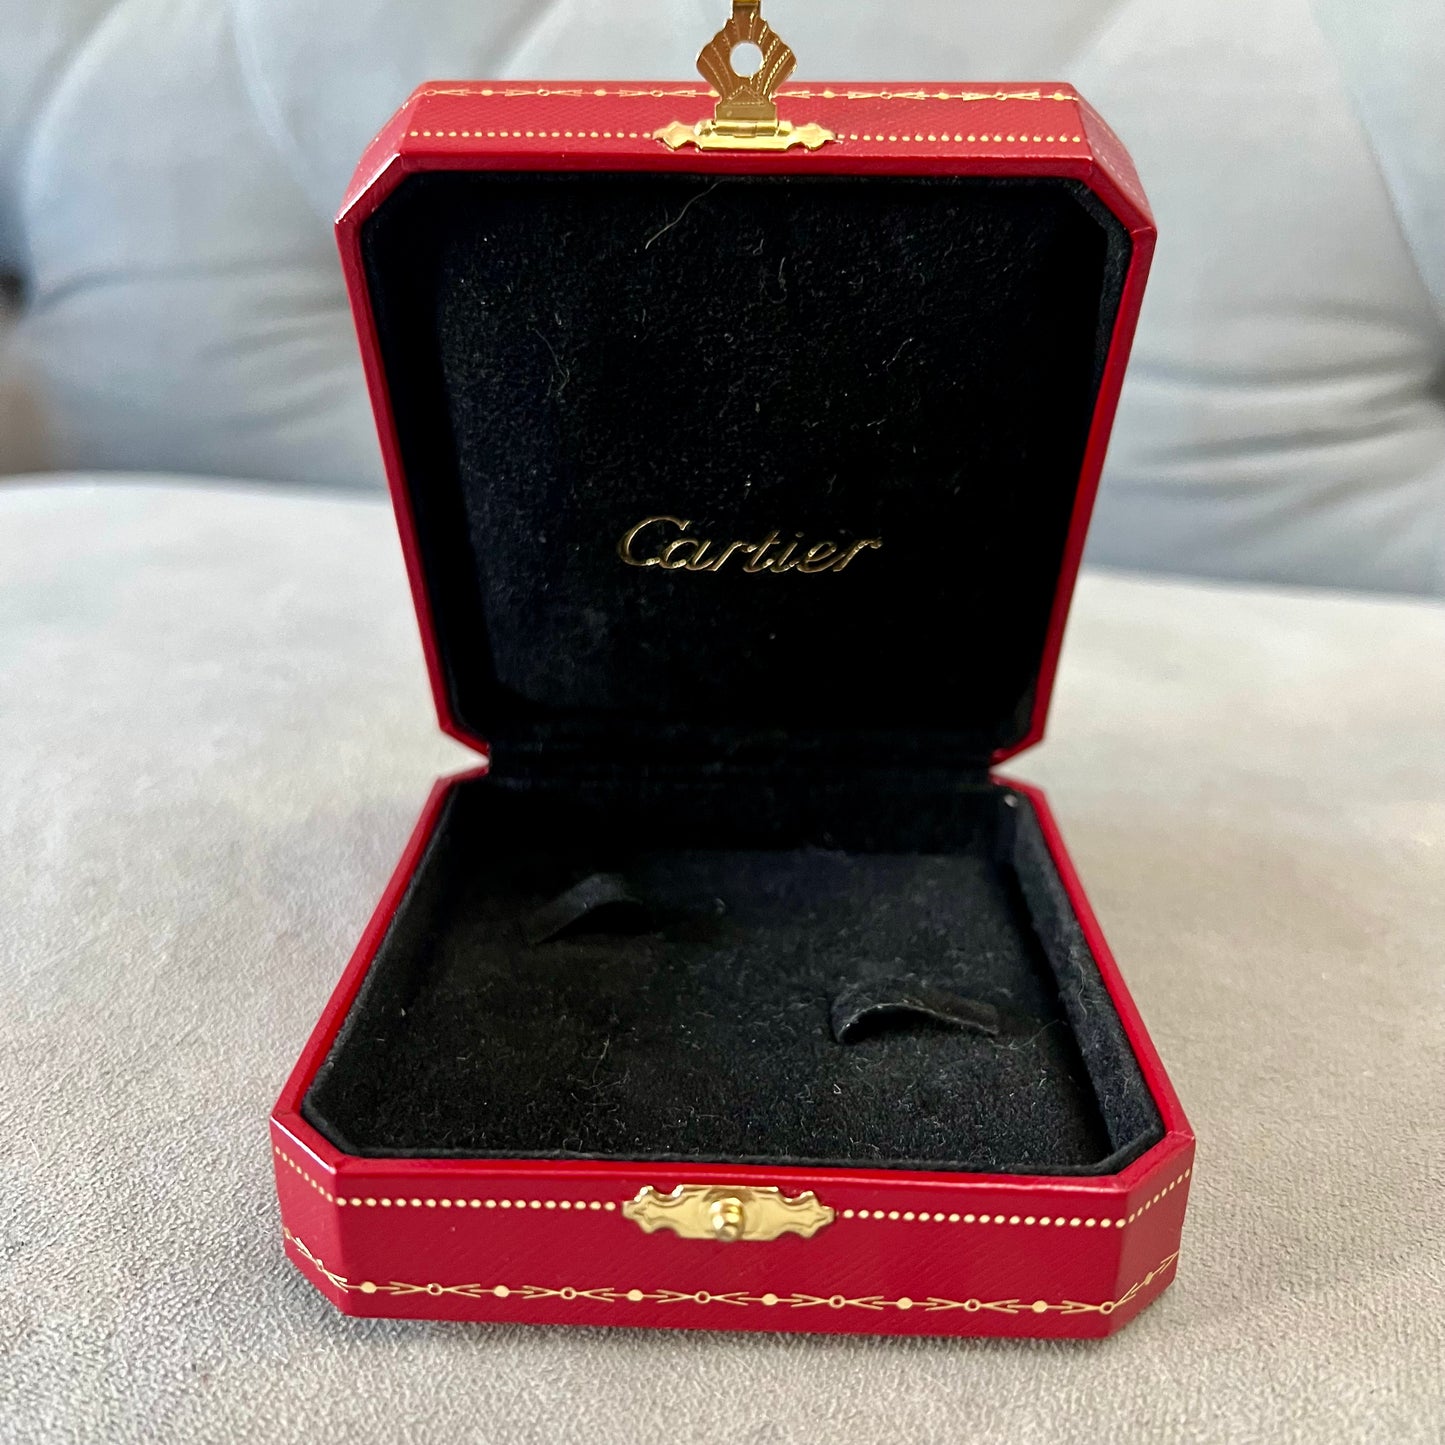 CARTIER Ring Box + Outer Box 3.90x3.5x1.5 inches